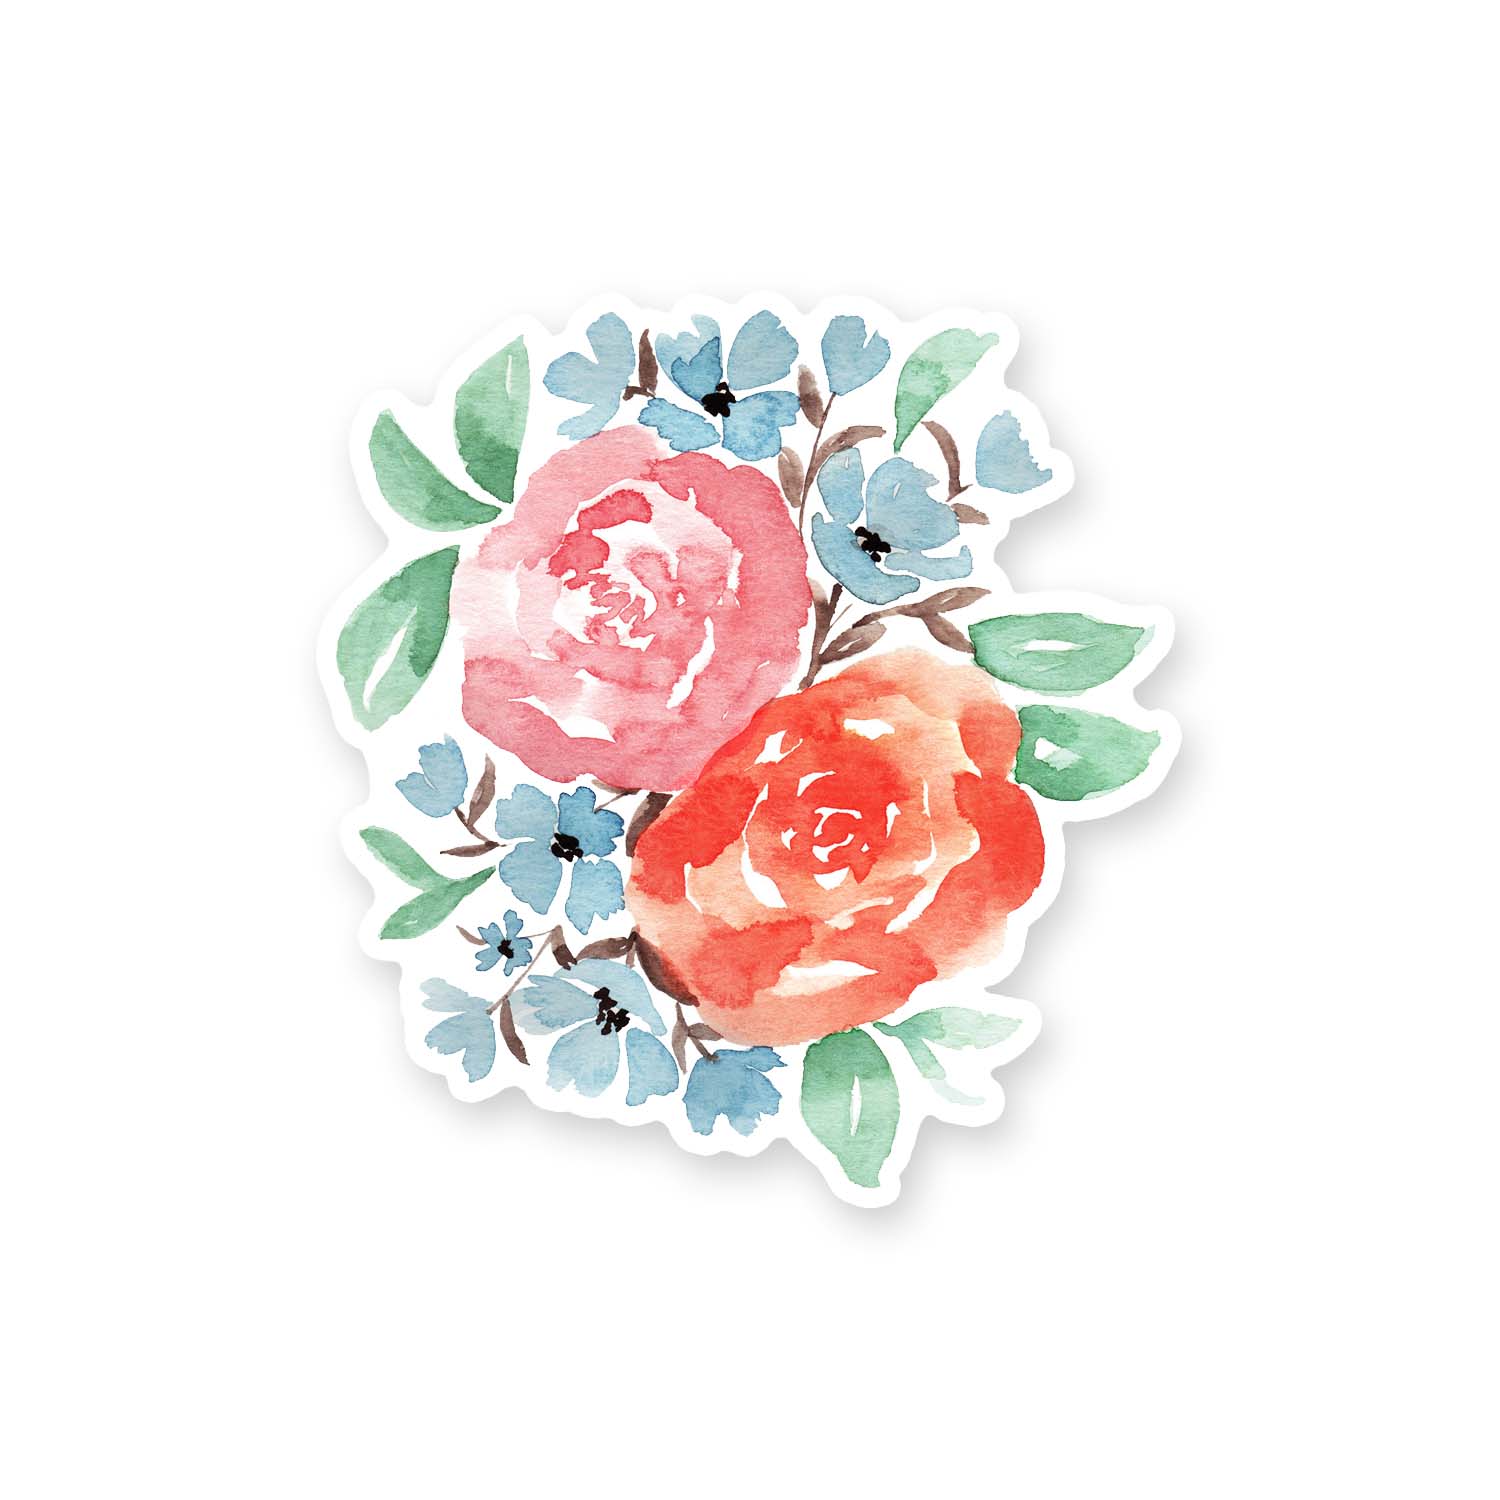 3" Autumn Floral Vinyl Sticker in blue, green, coral and pink